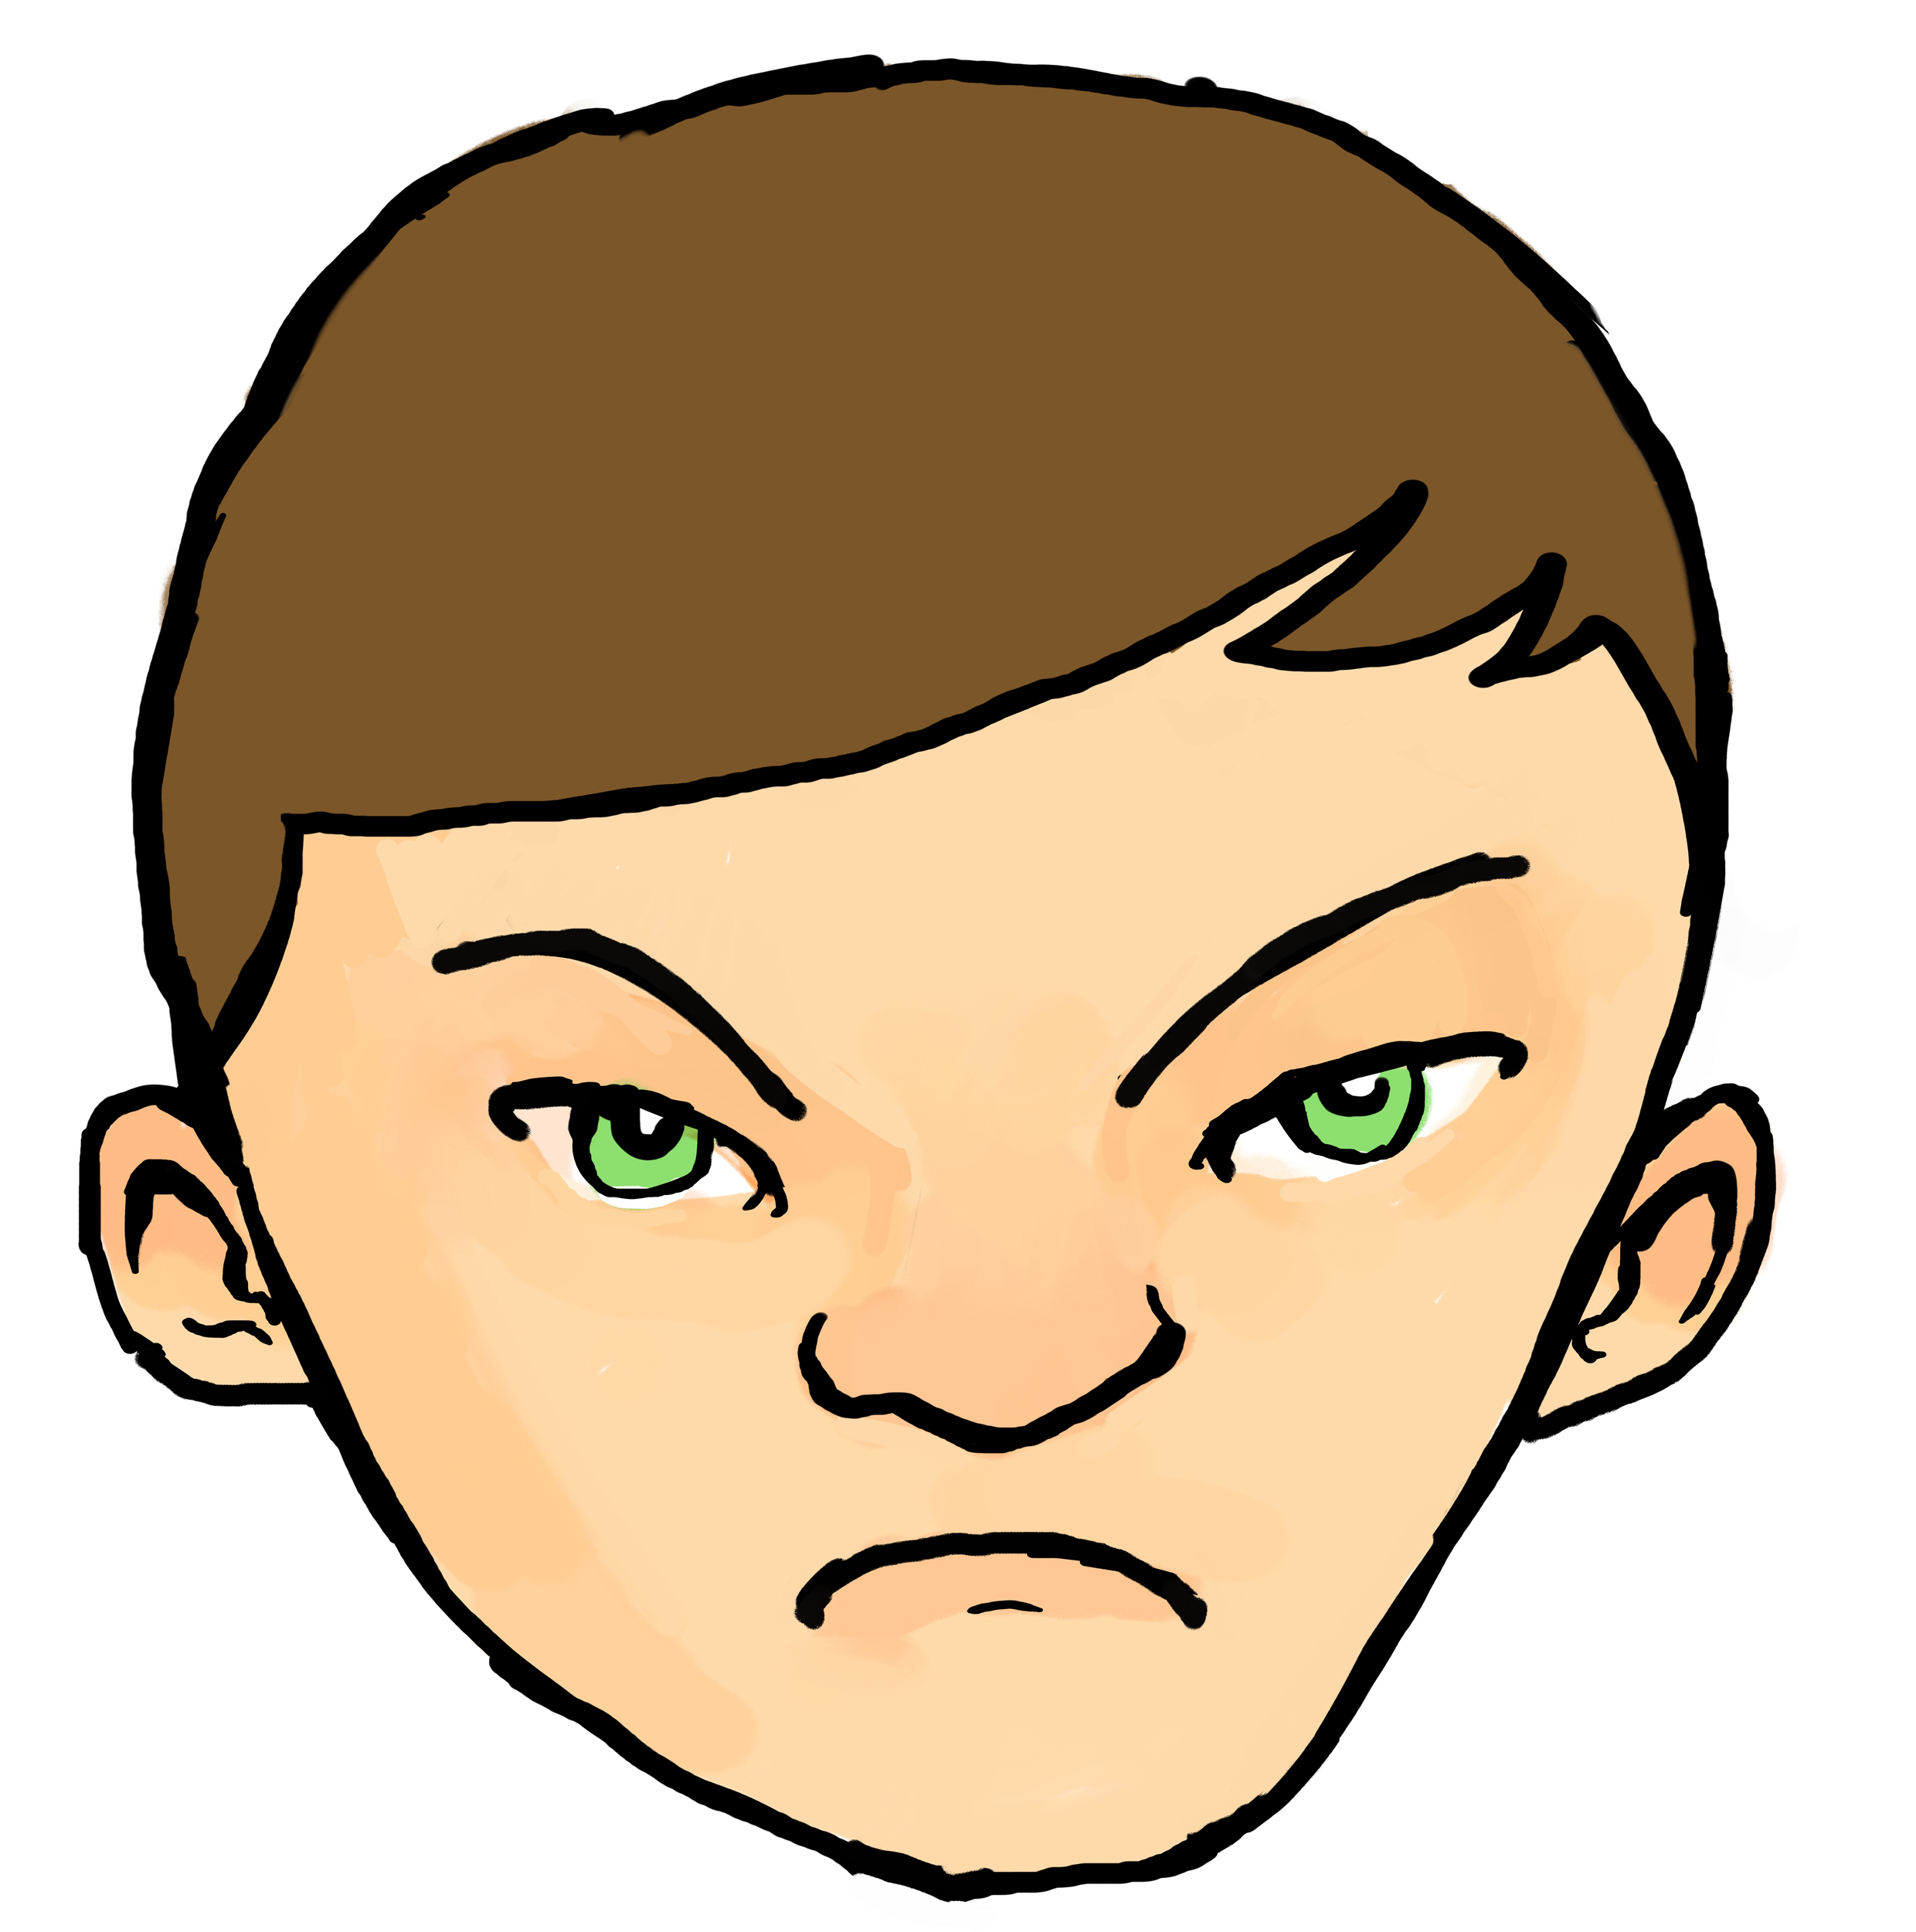 Angry kid face clipart 